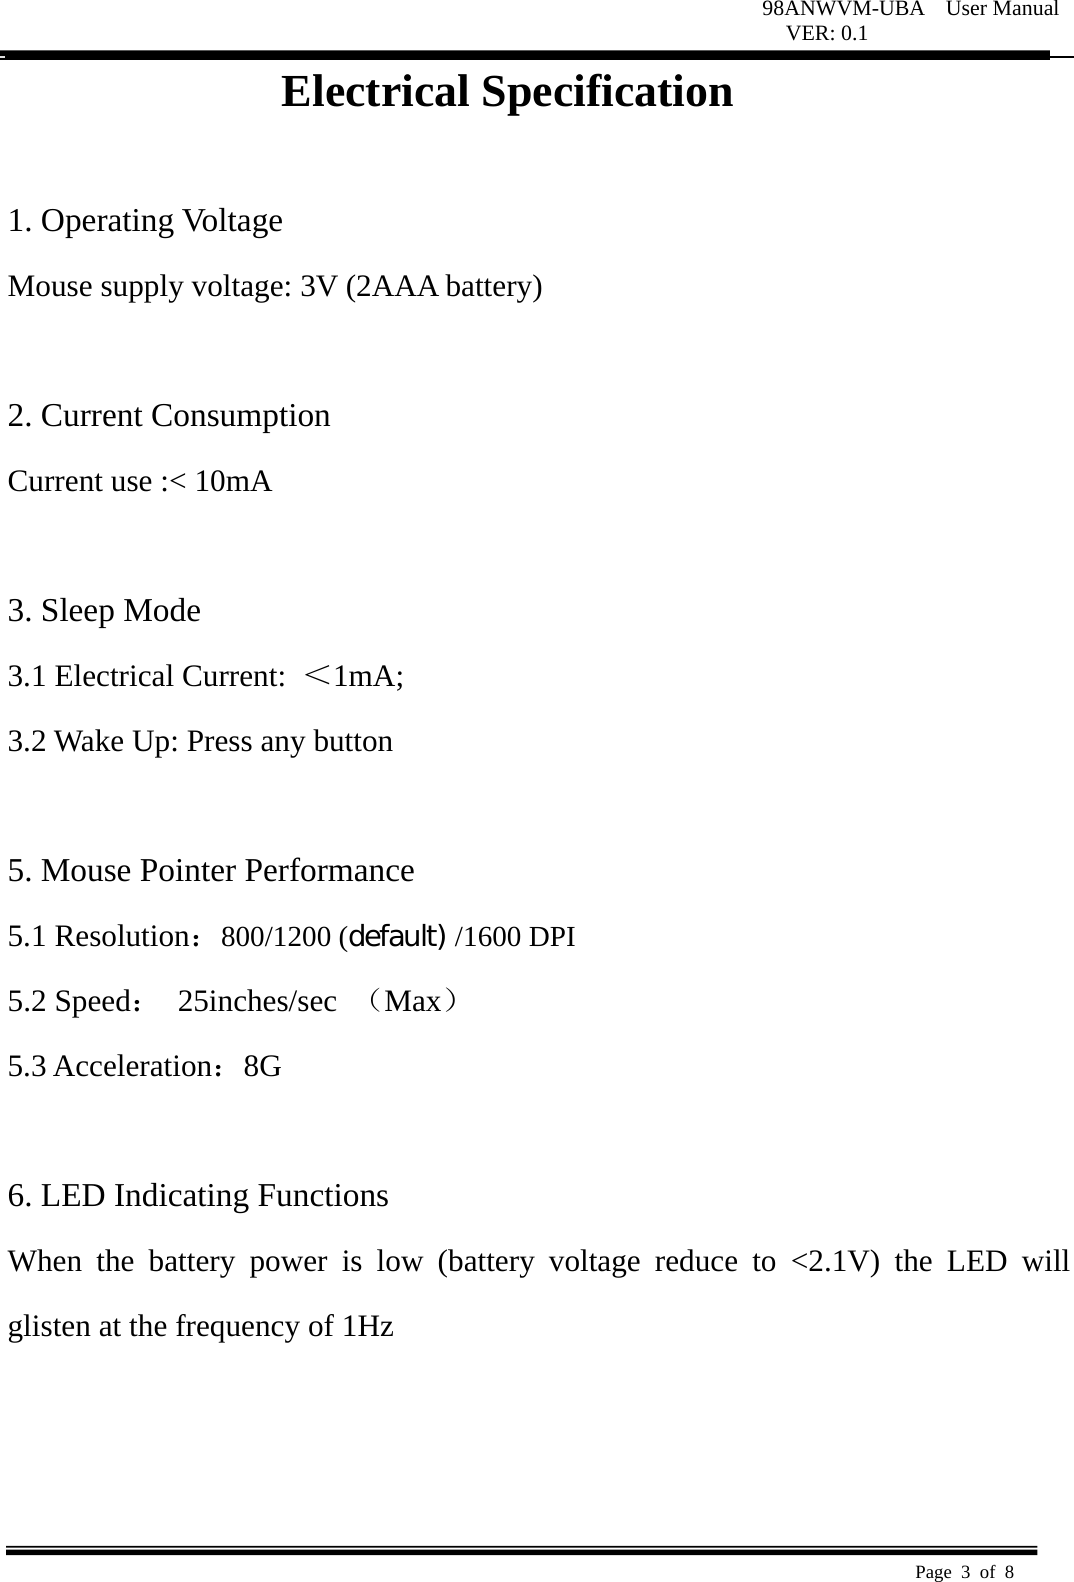 98ANWVM-UBA  User Manual VER: 0.1  Page 3 of 8   Electrical Specification  1. Operating Voltage   Mouse supply voltage: 3V (2AAA battery)    2. Current Consumption   Current use :&lt; 10mA    3. Sleep Mode   3.1 Electrical Current:  ＜1mA;  3.2 Wake Up: Press any button    5. Mouse Pointer Performance 5.1 Resolution：800/1200 (default) /1600 DPI 5.2 Speed： 25inches/sec （Max） 5.3 Acceleration：8G   6. LED Indicating Functions   When the battery power is low (battery voltage reduce to &lt;2.1V) the LED will glisten at the frequency of 1Hz      